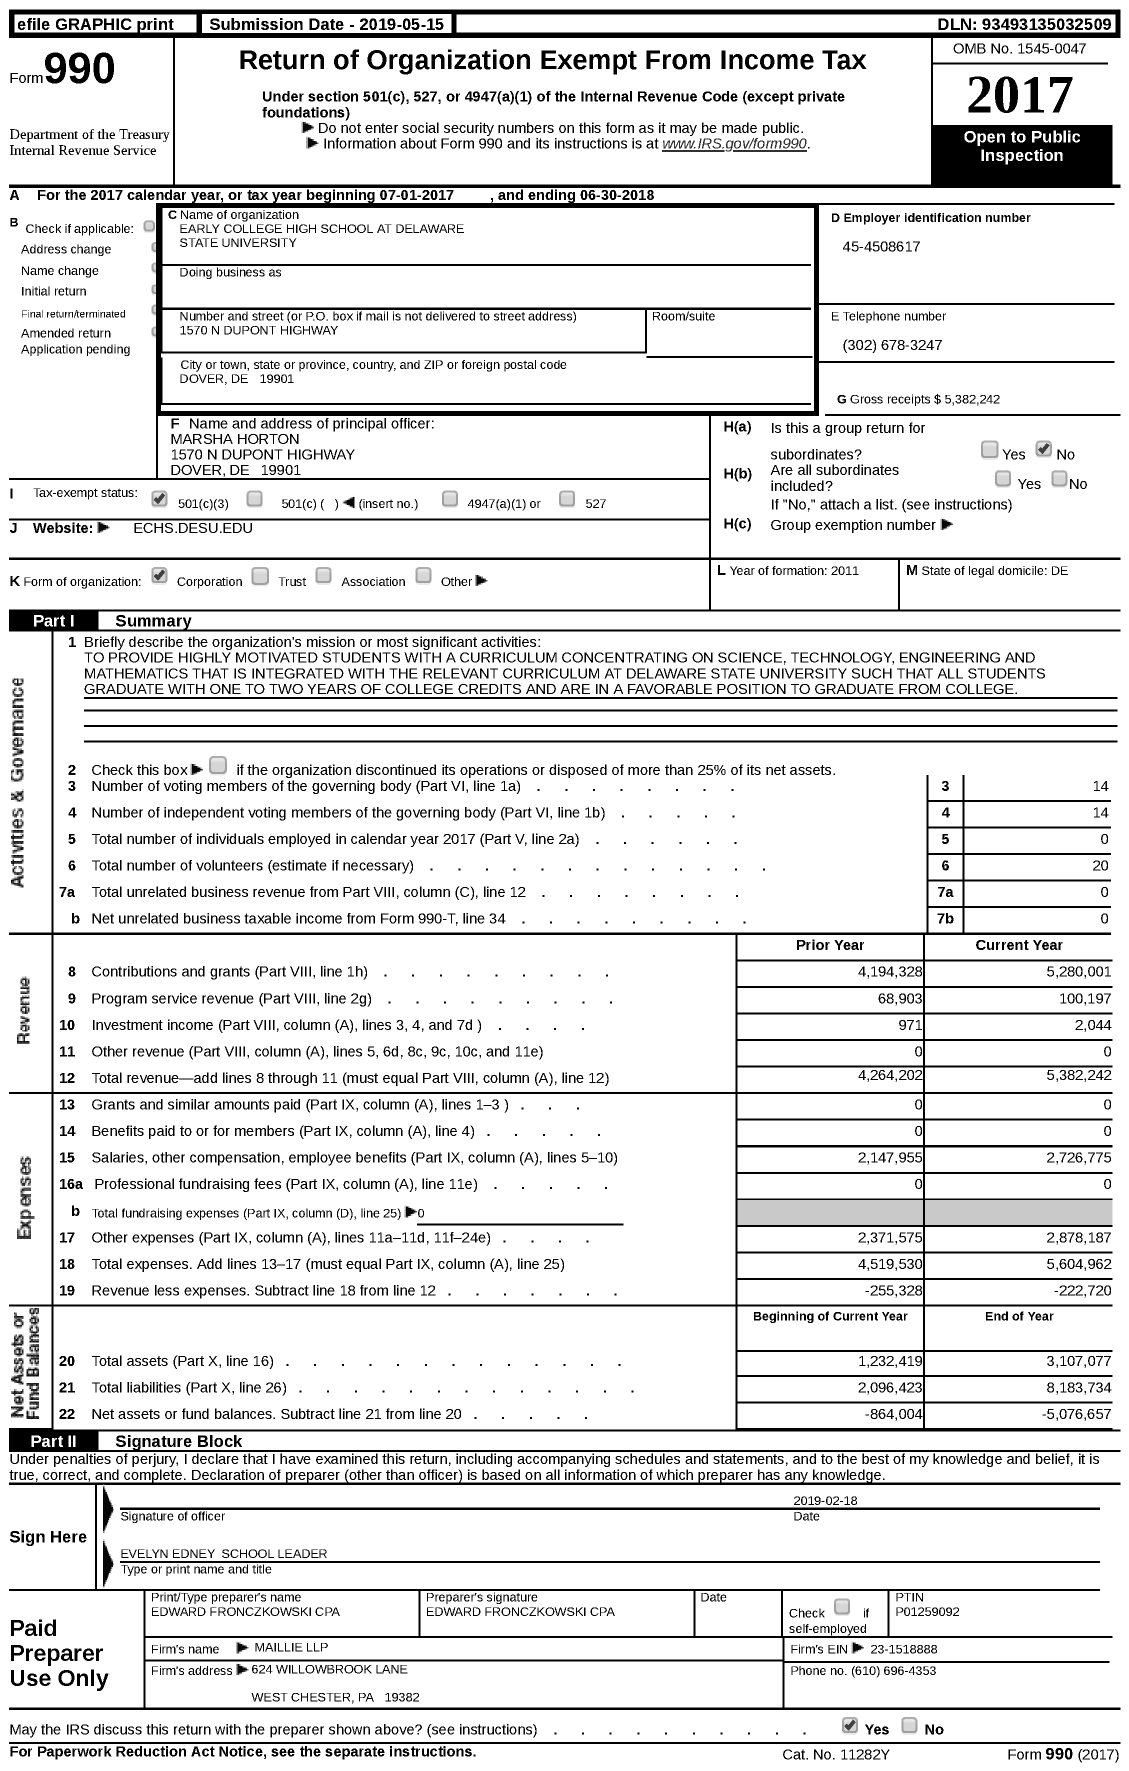 Image of first page of 2017 Form 990 for Early College School at Delaware State University